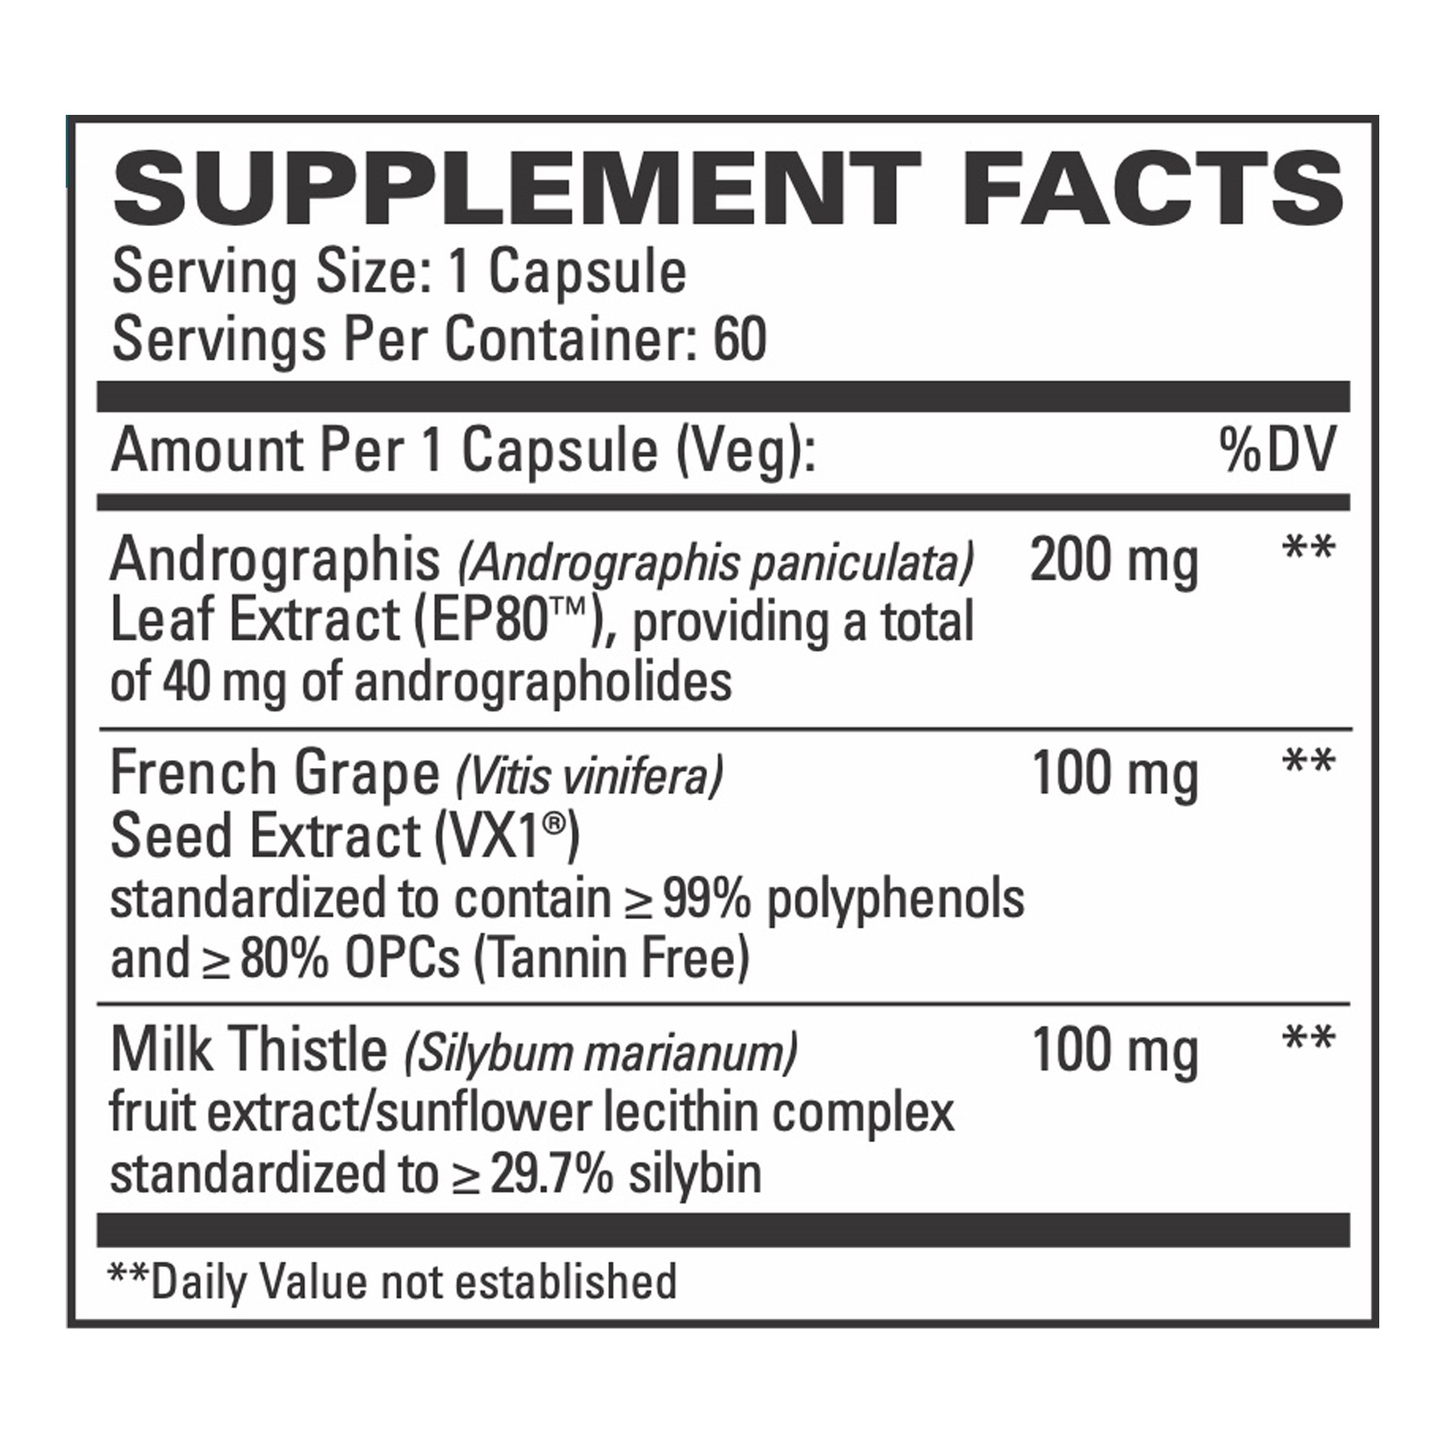 Total Liver Support - 60 Capsules